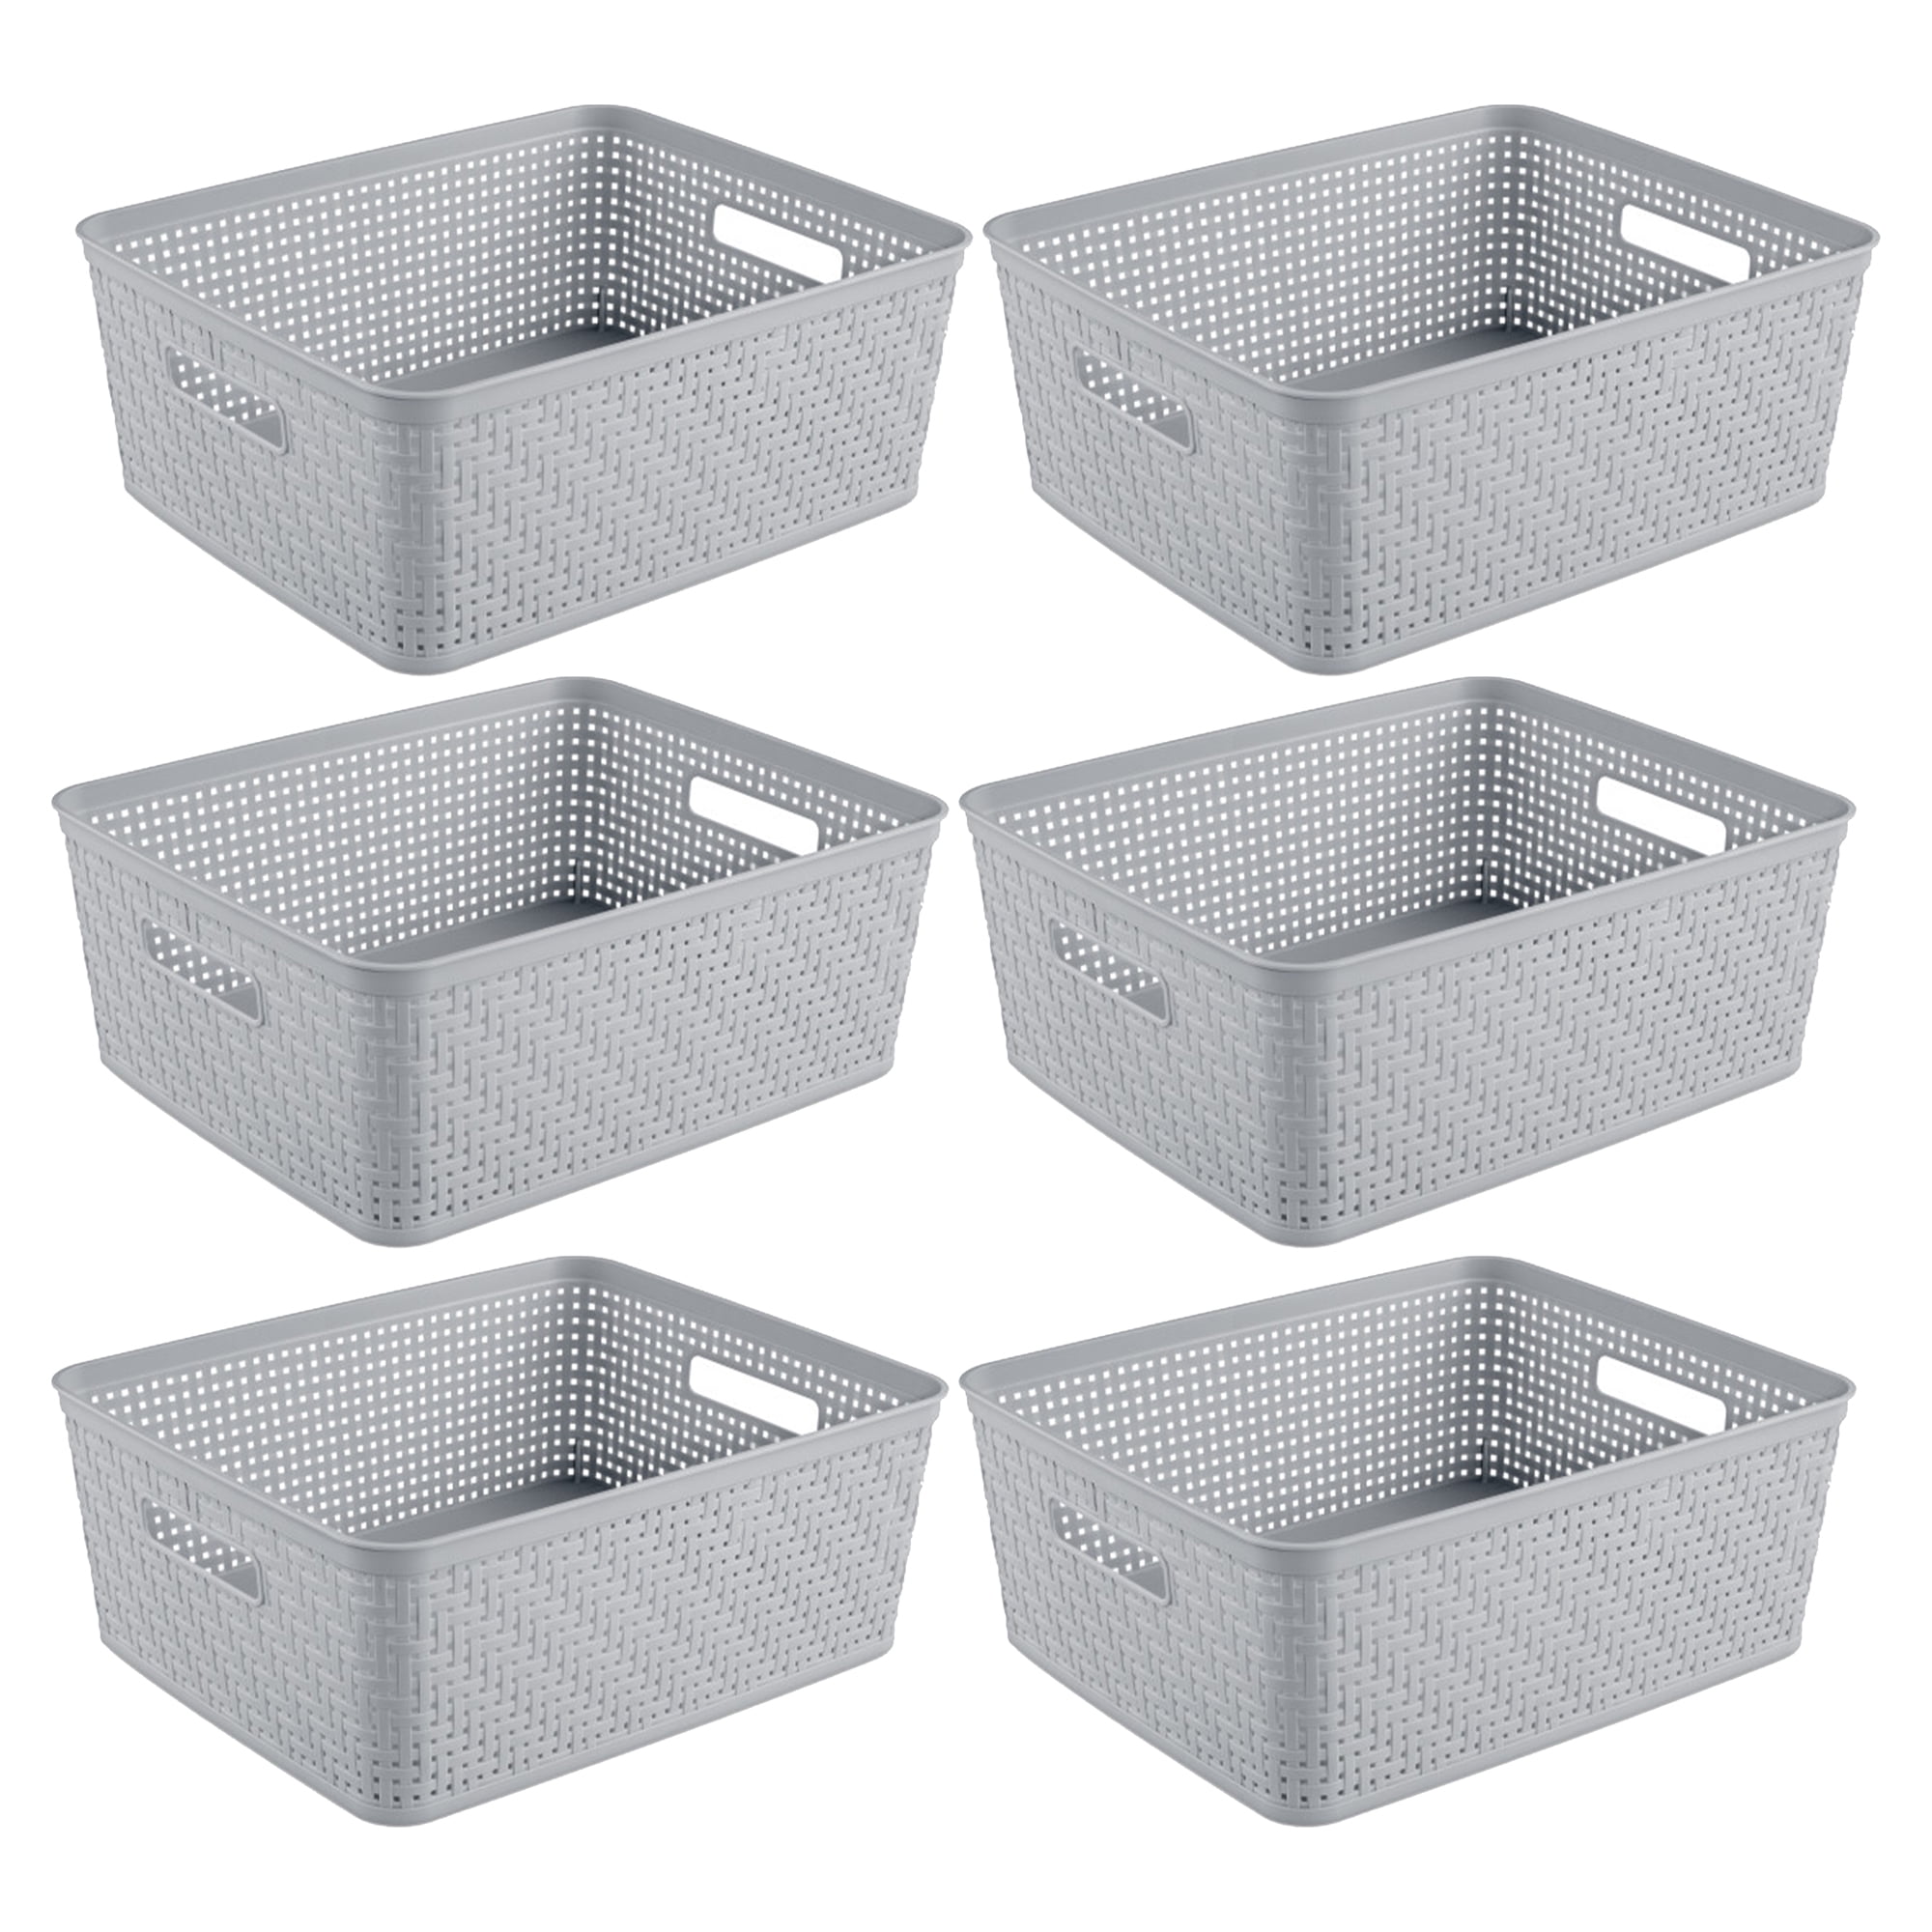 Rethink Your Room Set of 3 Large Plastic Open Storage Basket, 14 x 11.5 x 5 Inches, Durable Pantry and Kitchen Organization Bins for Organization